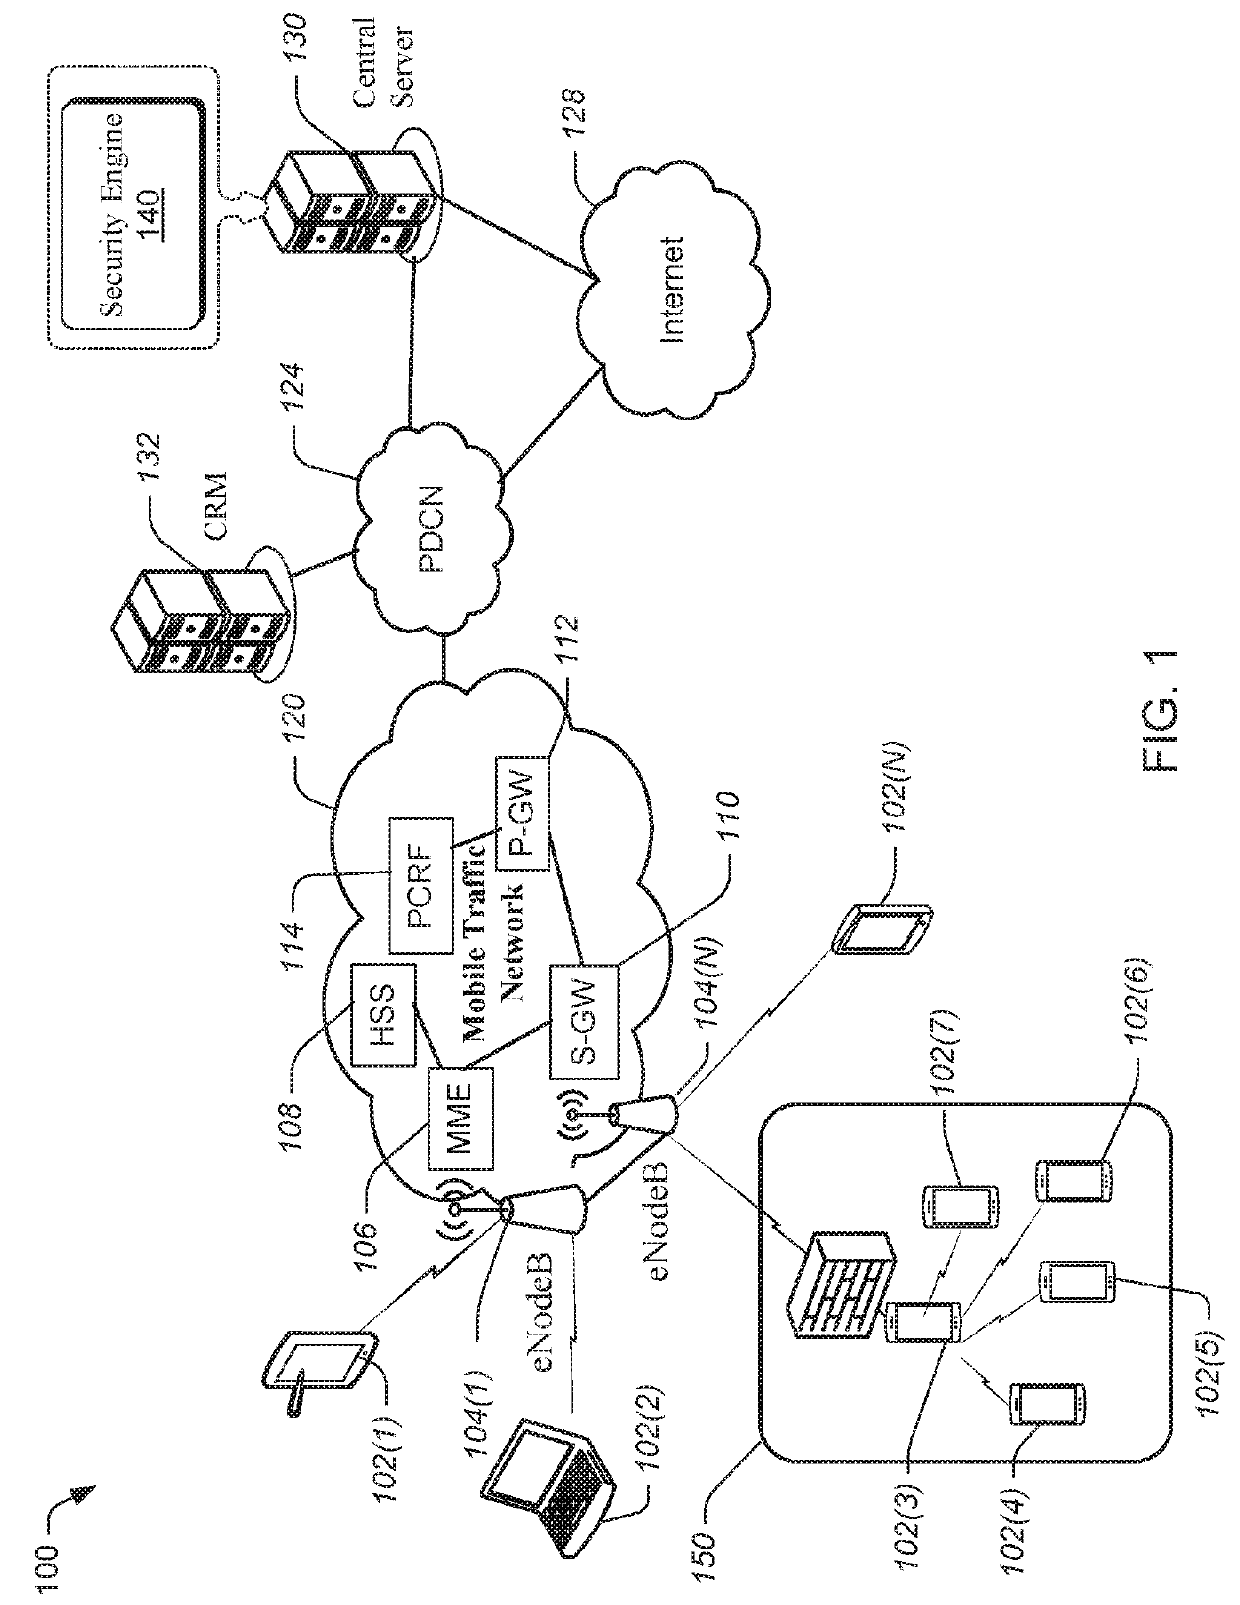 Dynamic provisioning of a firewall role to user devices